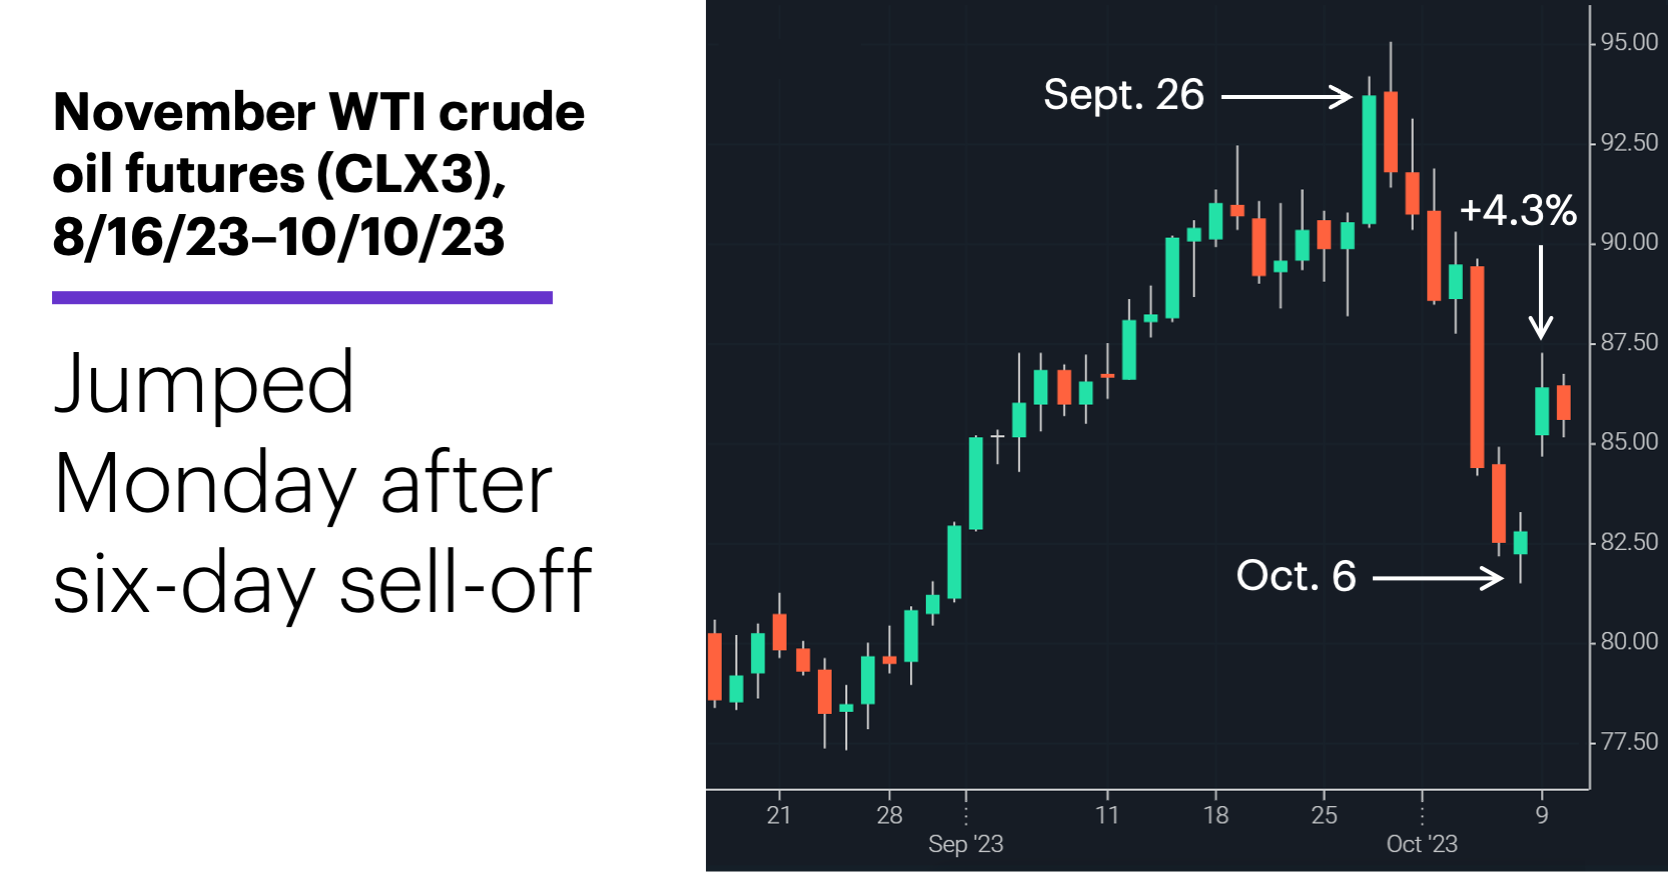 Chart 1: November WTI crude oil futures (CLX3), 8/16/23–10/10/23. Jumped Monday after six-day sell-off.